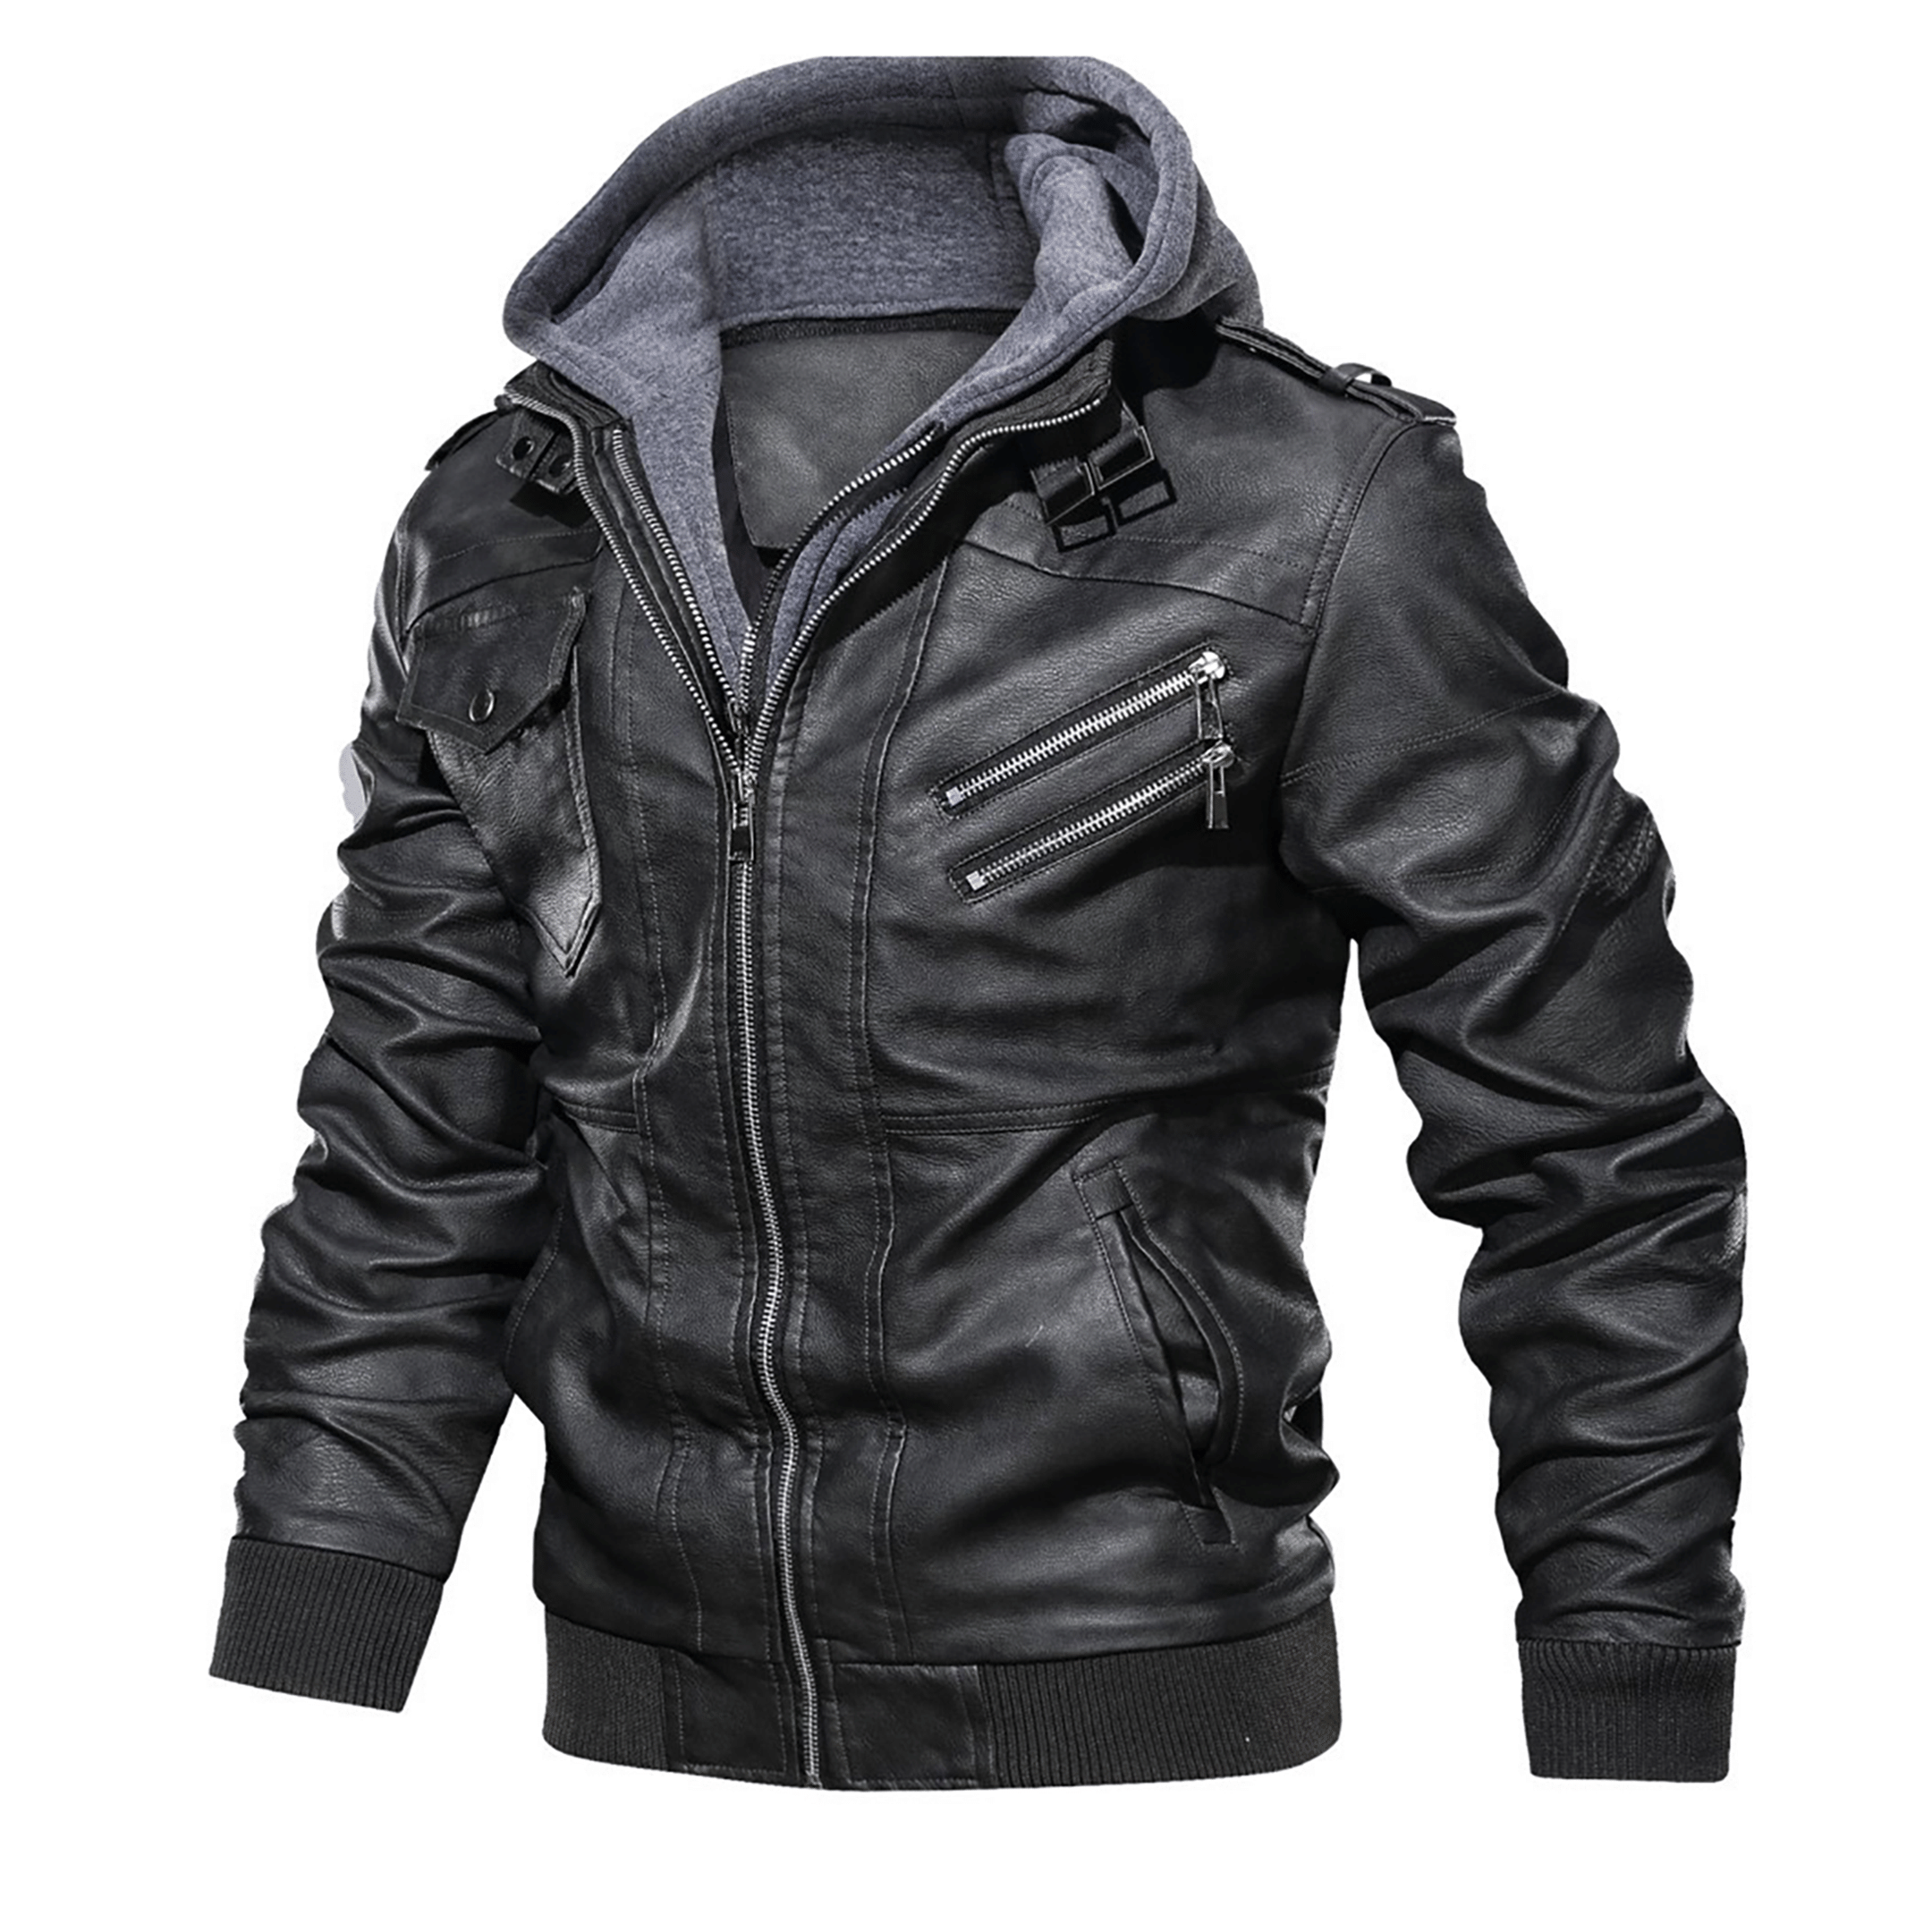 Top leather jackets and latest products 117